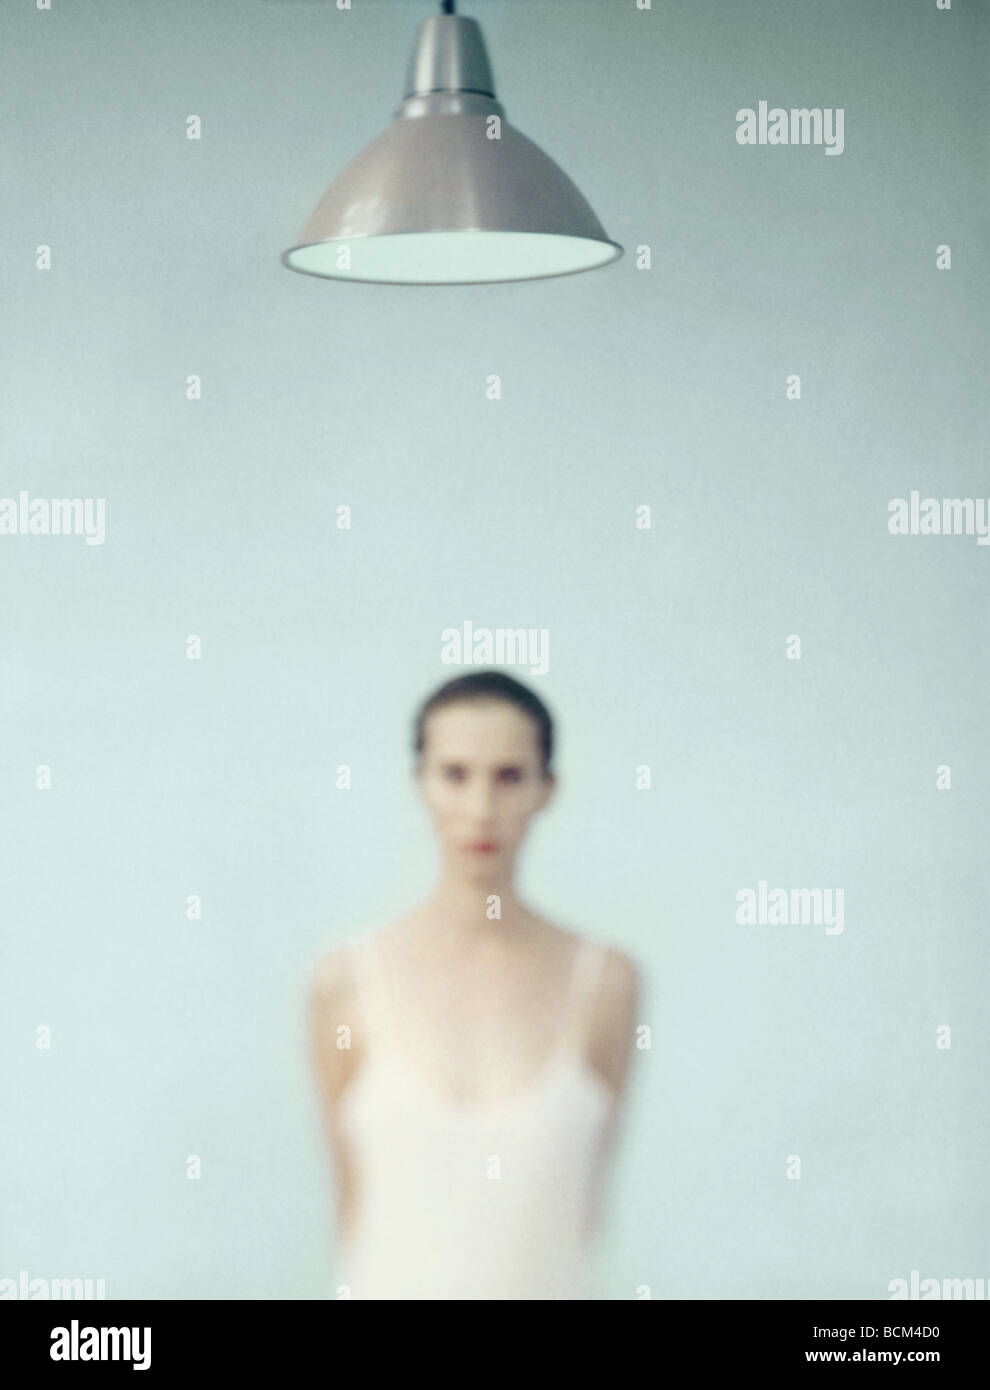 Young woman standing under lamp, focus on lamp in foreground Stock Photo